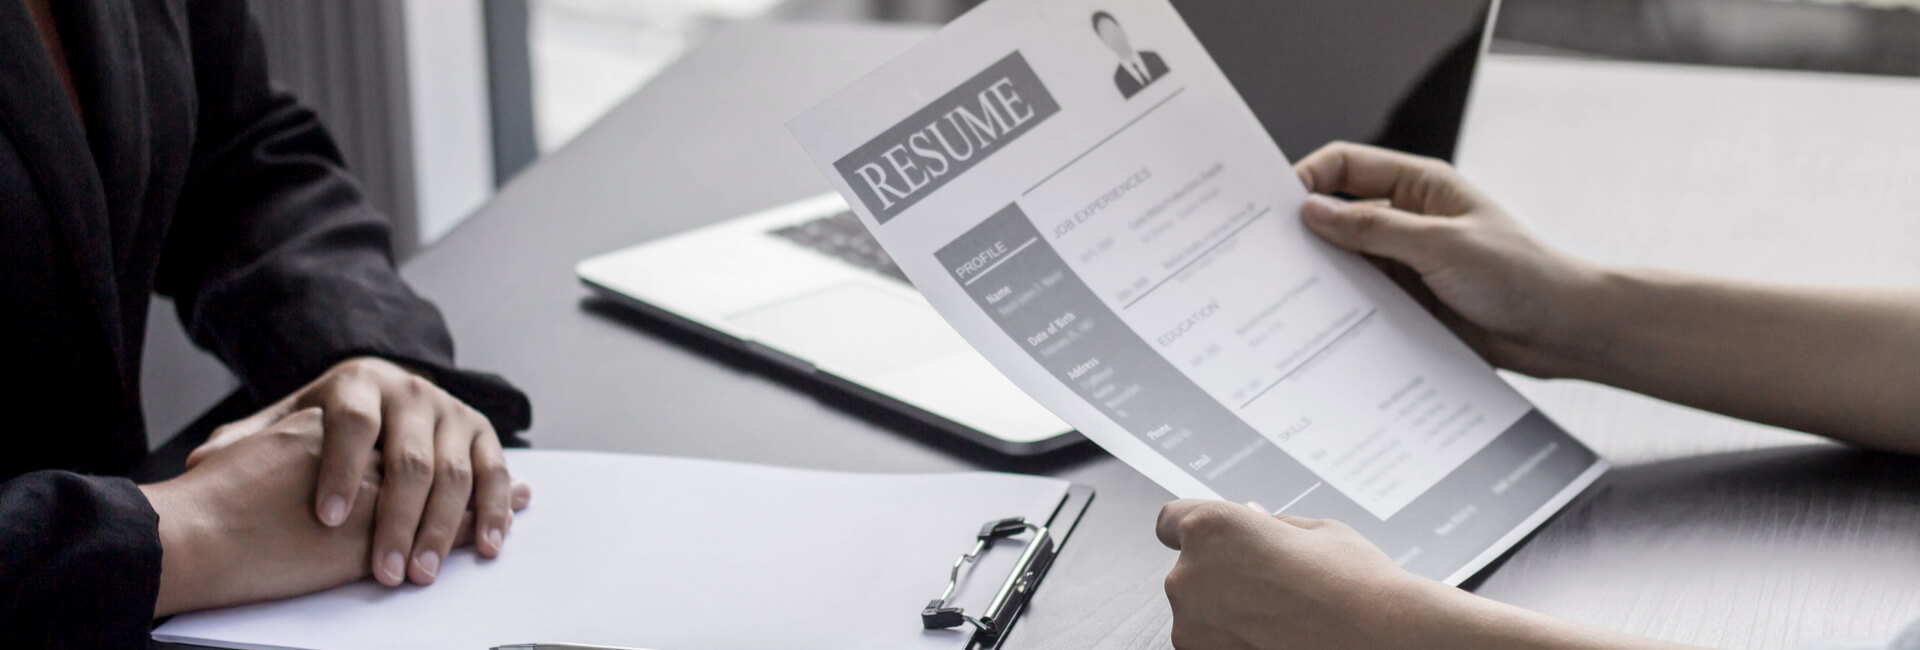 Make Sure Your Resume Survives The Six-Second Test